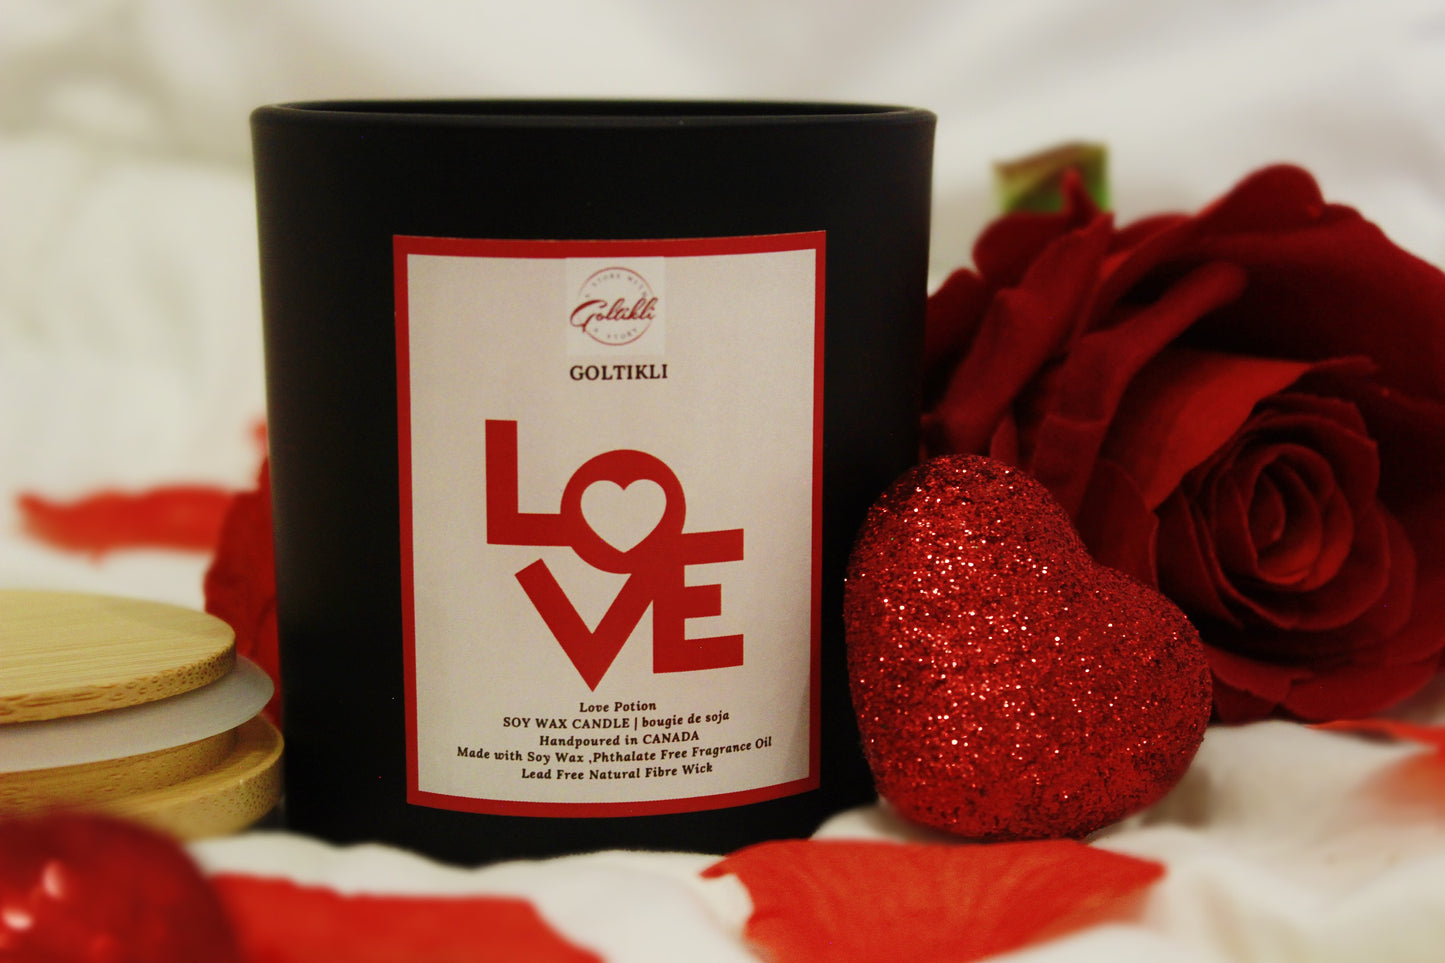 LOVE- Love Potion Scented Soy Wax Candles